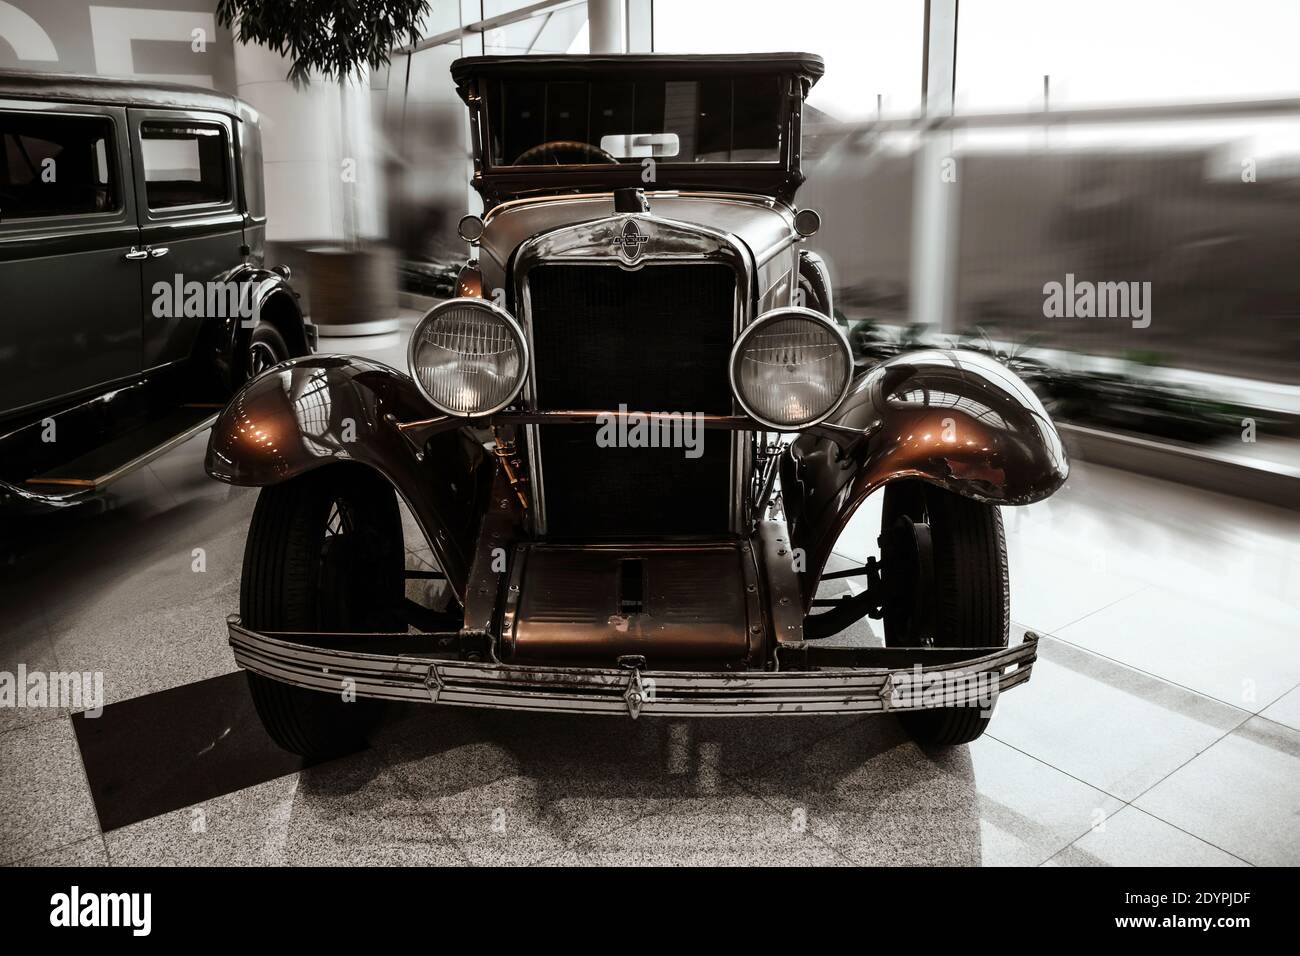 4 June 2019, Moscow, Russia: front view of Chevrolet AC Open Tourer 1929. Classical retro cars of 1920s. Stock Photo